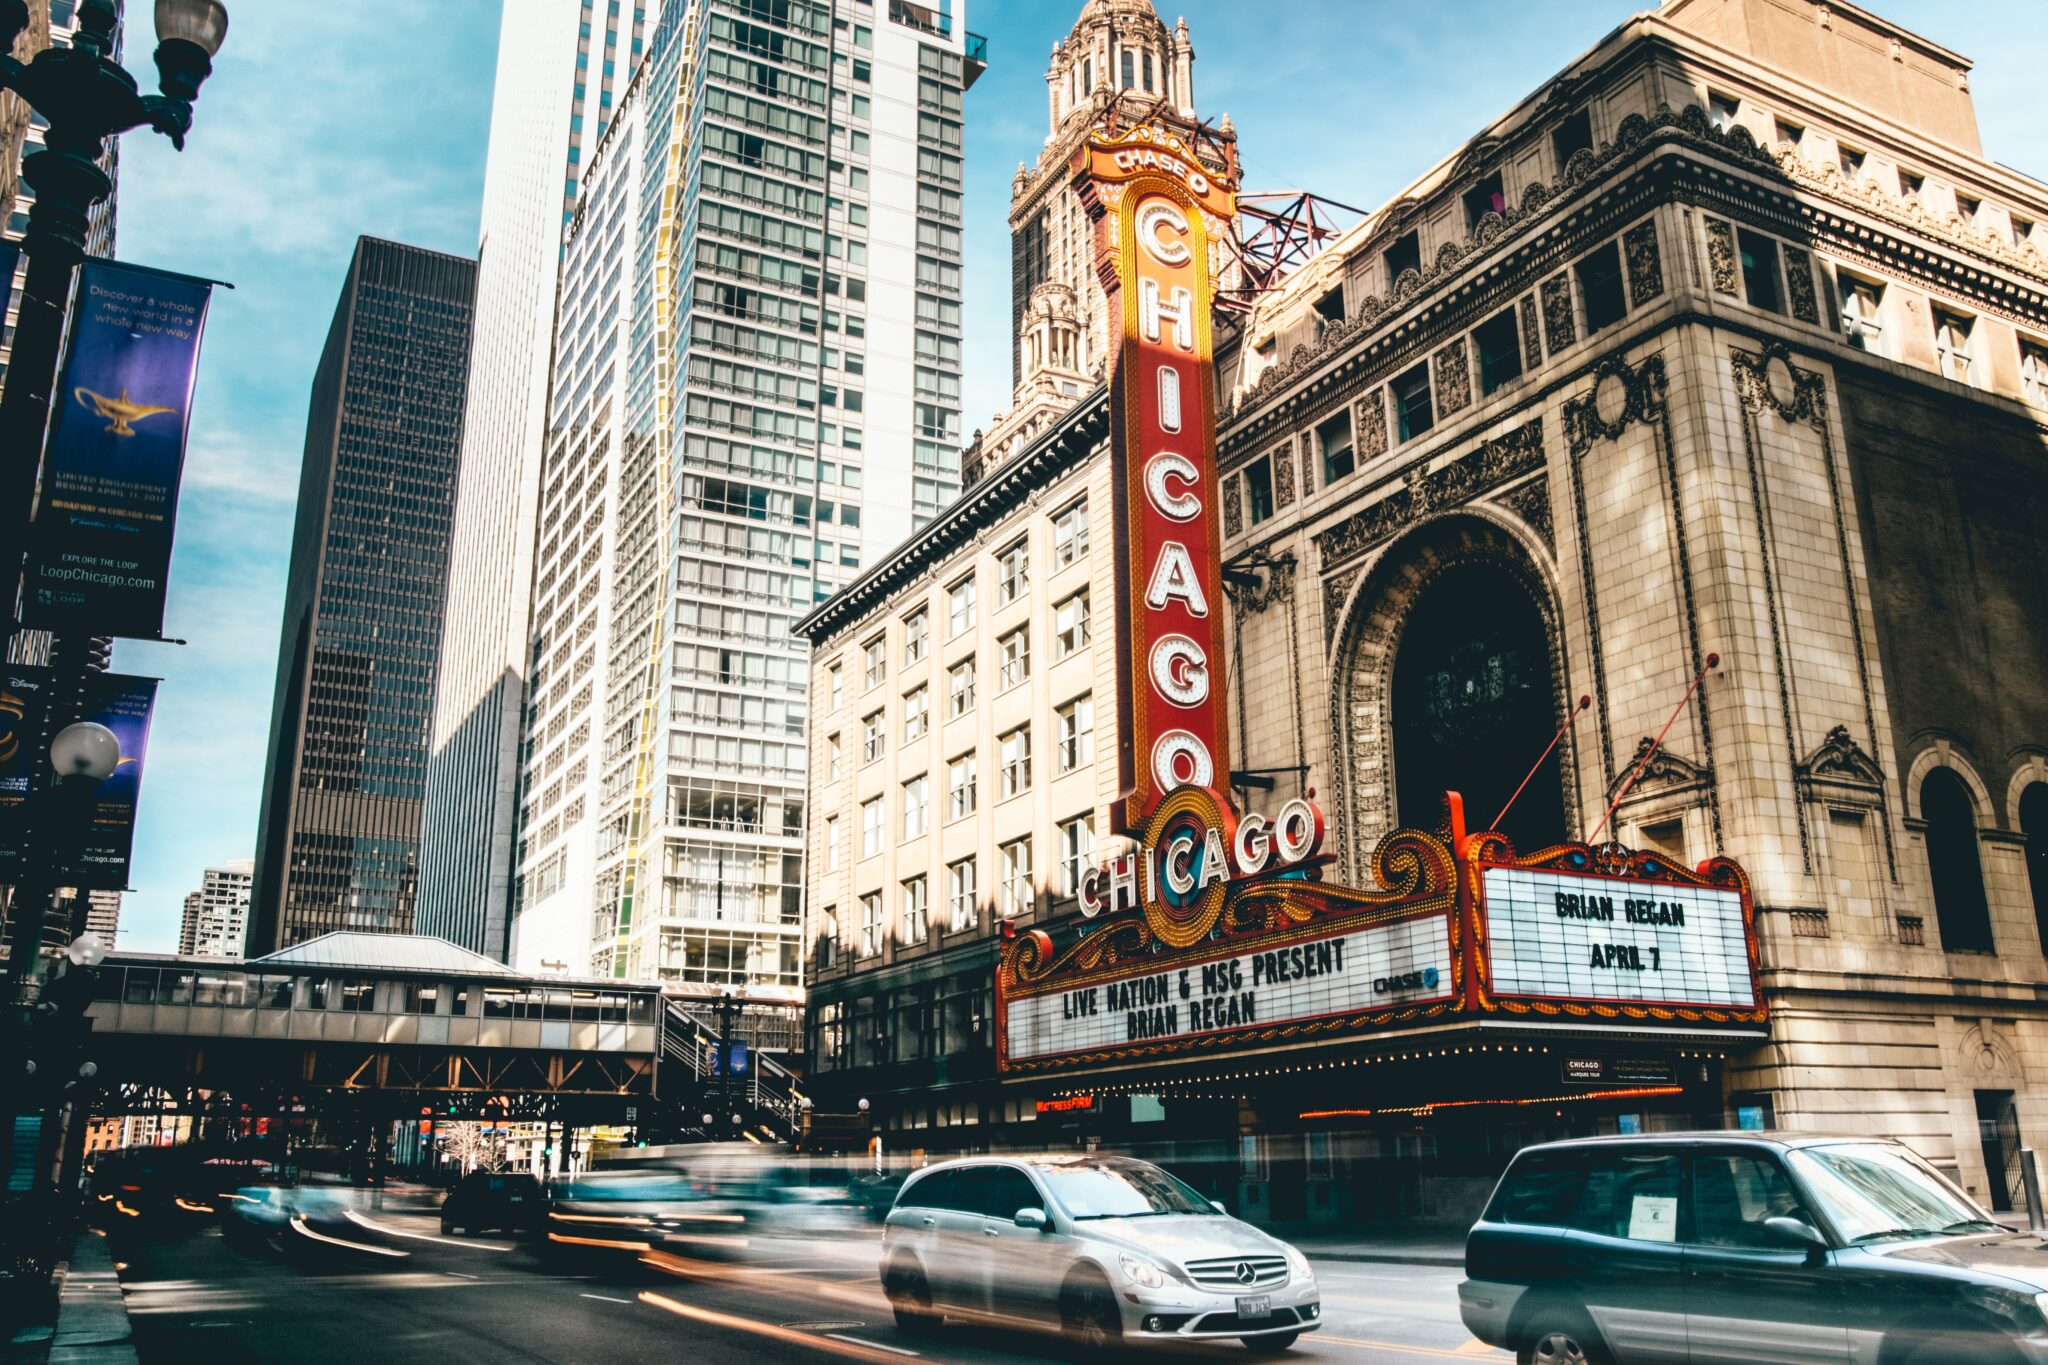 10 things to do in Chicago